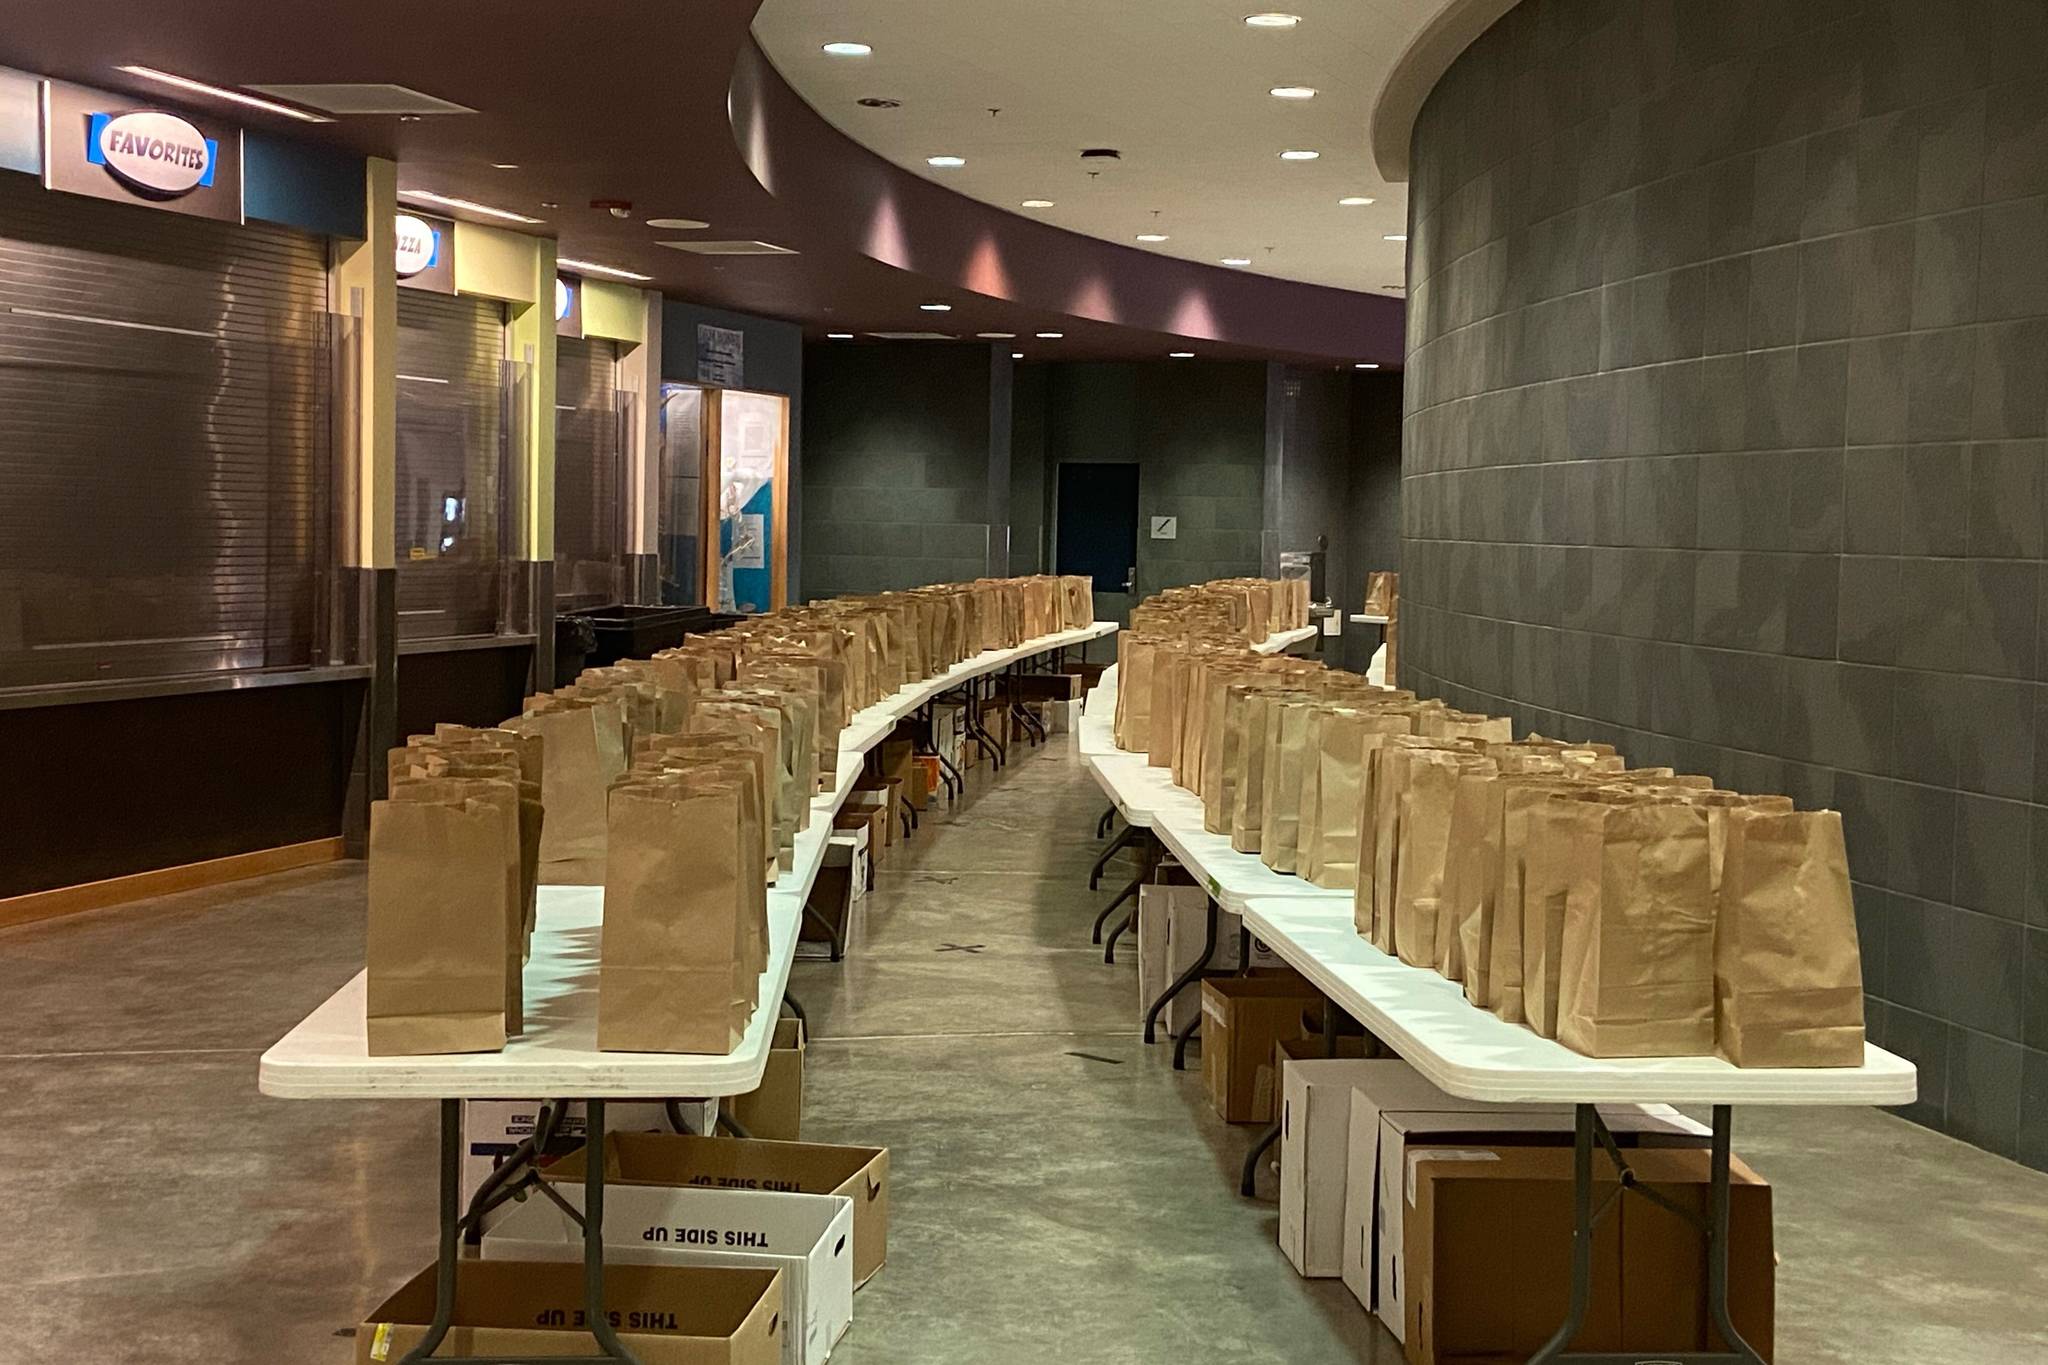 Meals slated for children in Juneau over Thanksgiving weekend are arrayed on tables at Thunder Mountain High School on Nov. 25, 2020. (Courtesy photo / Luke Adams)